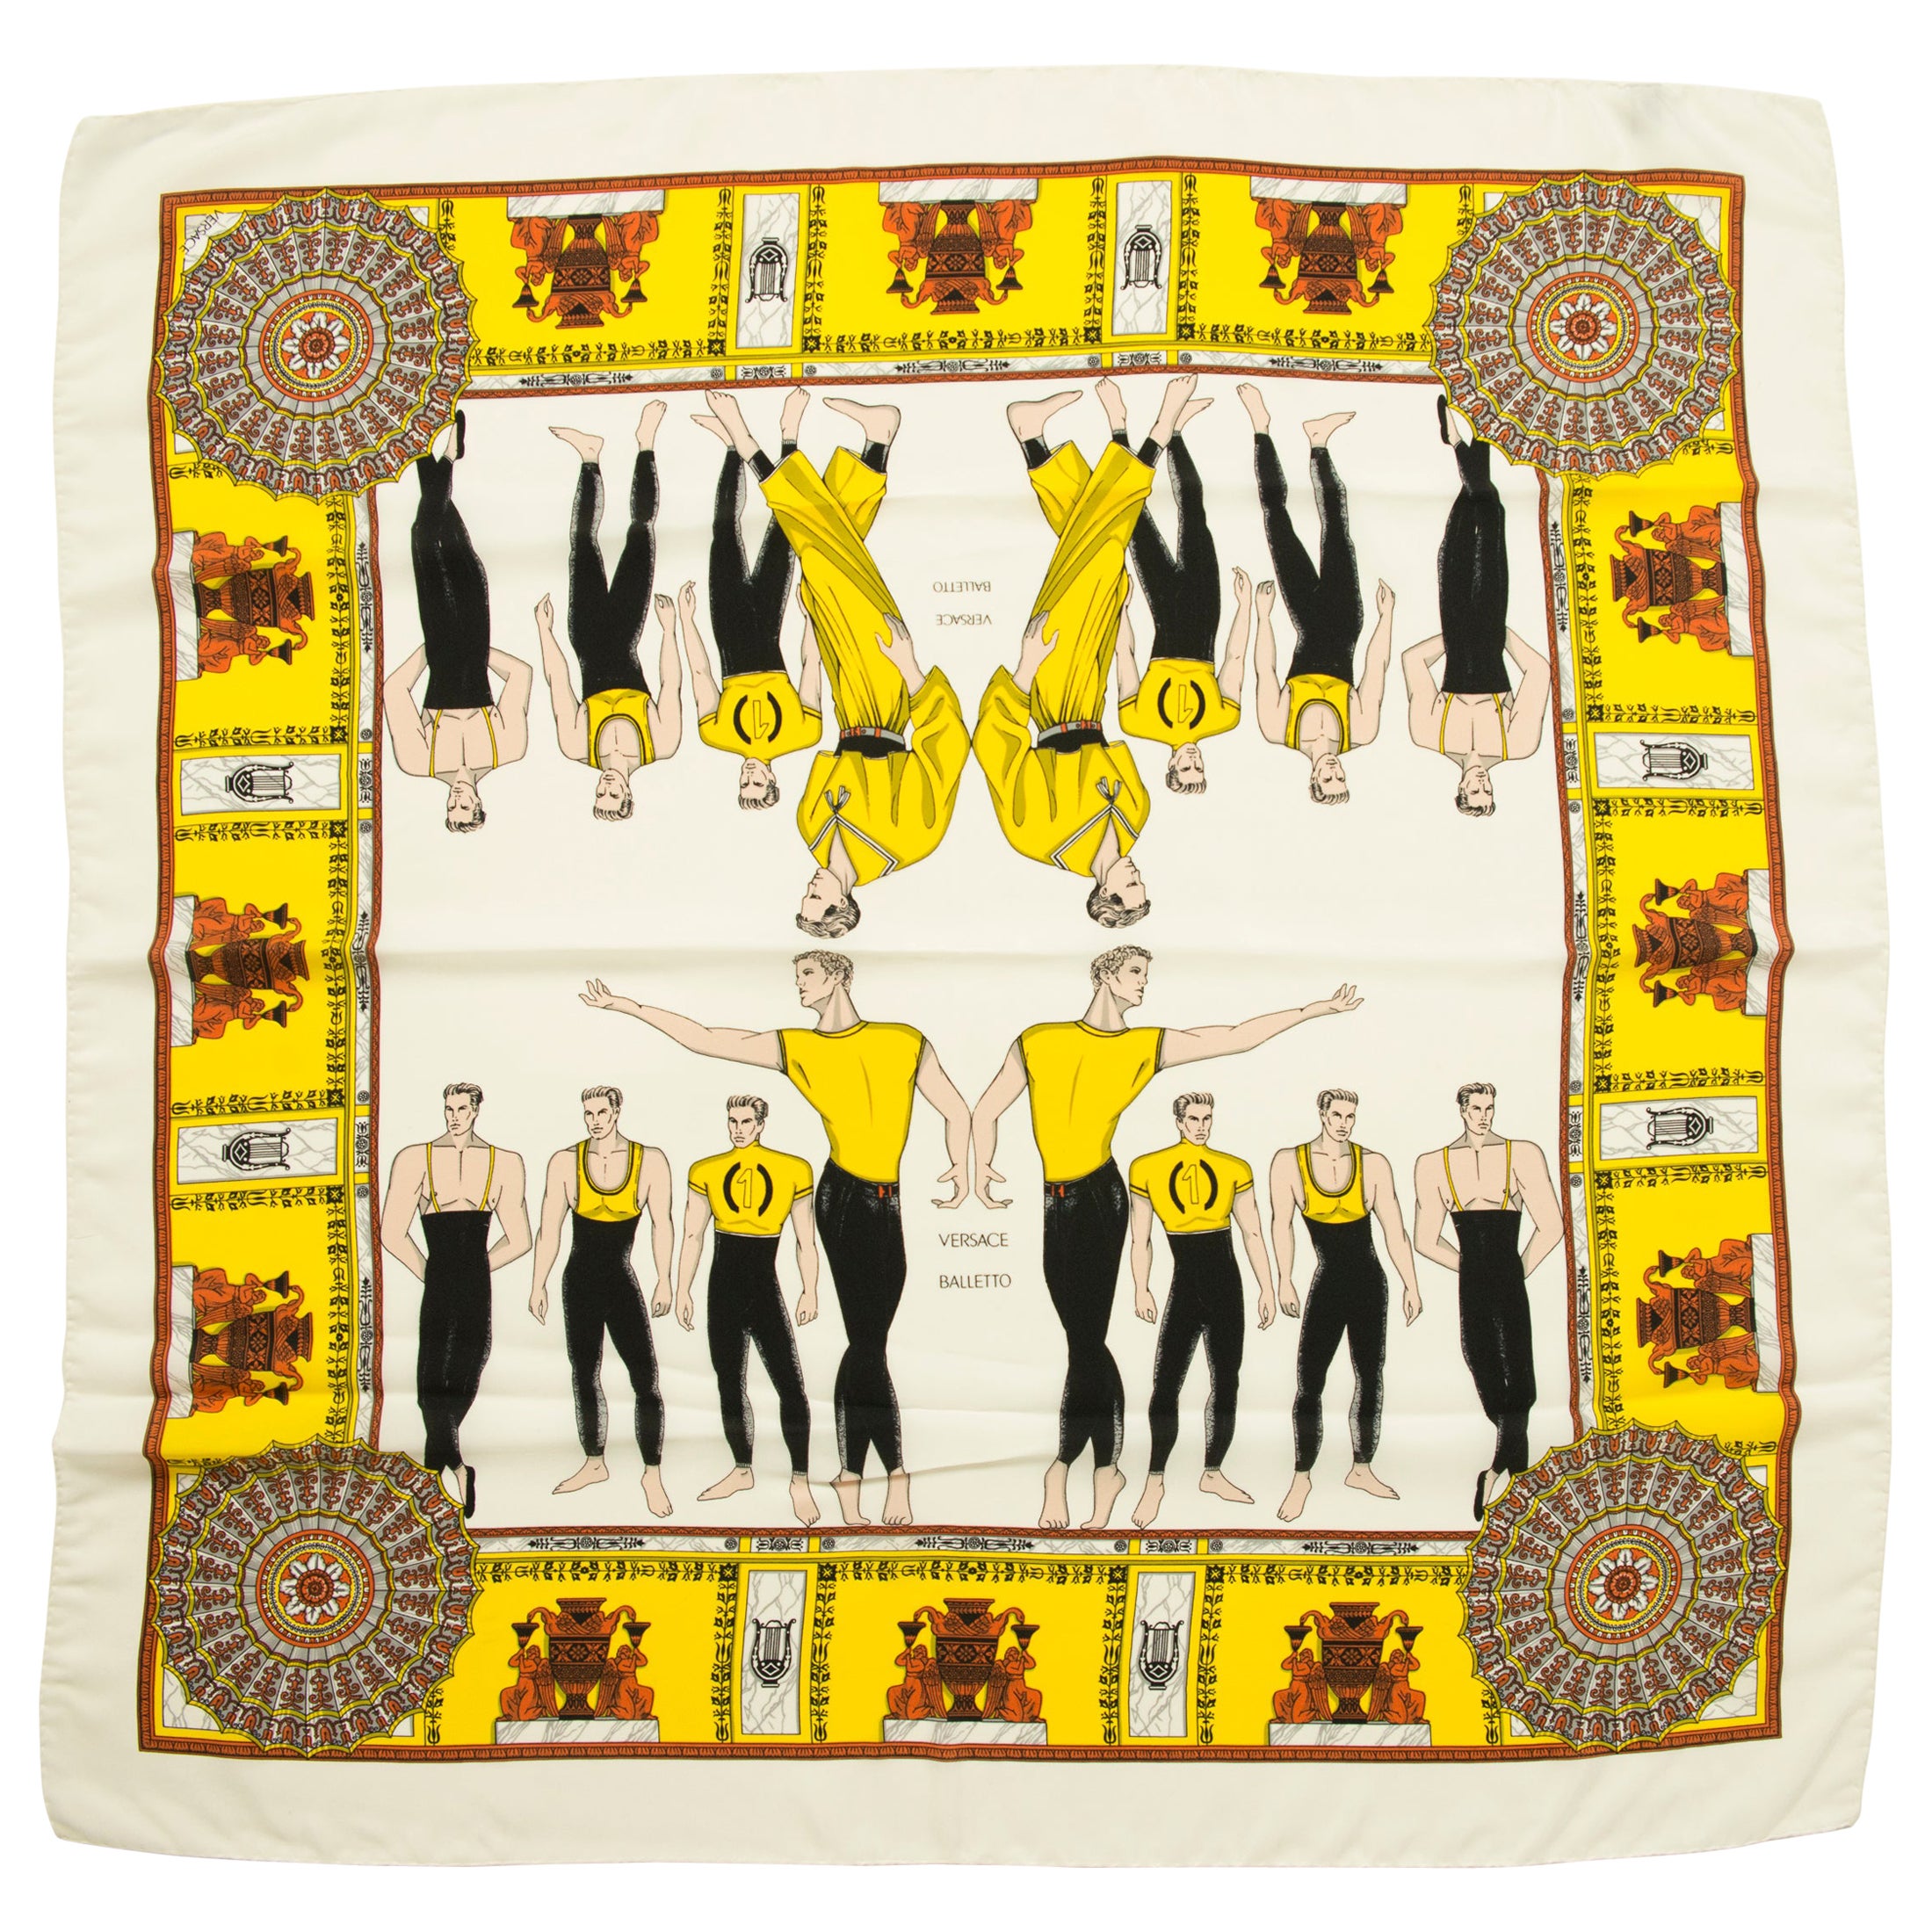 How should I wear a wild Versace print scarf?